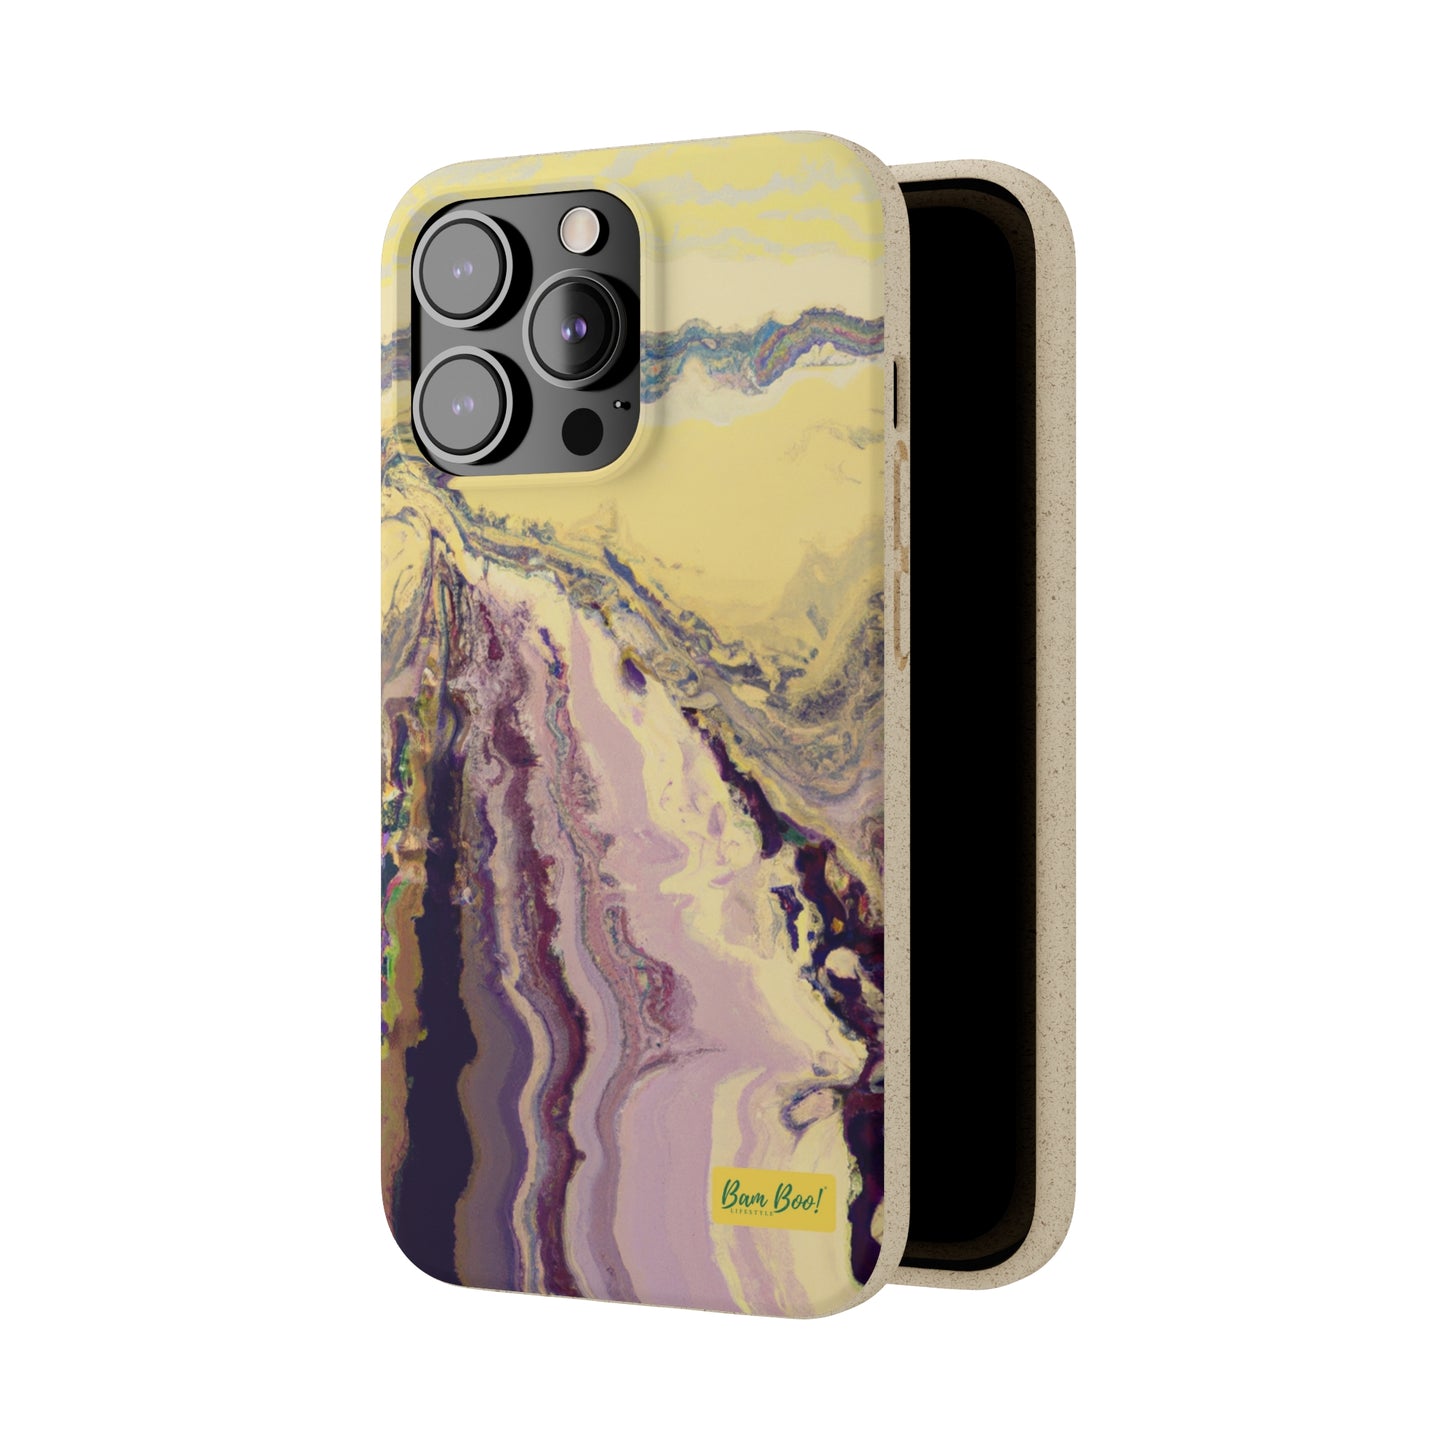 "Abstract Universe: A Creative Exploration of Color, Shape, and Texture." - Bam Boo! Lifestyle Eco-friendly Cases